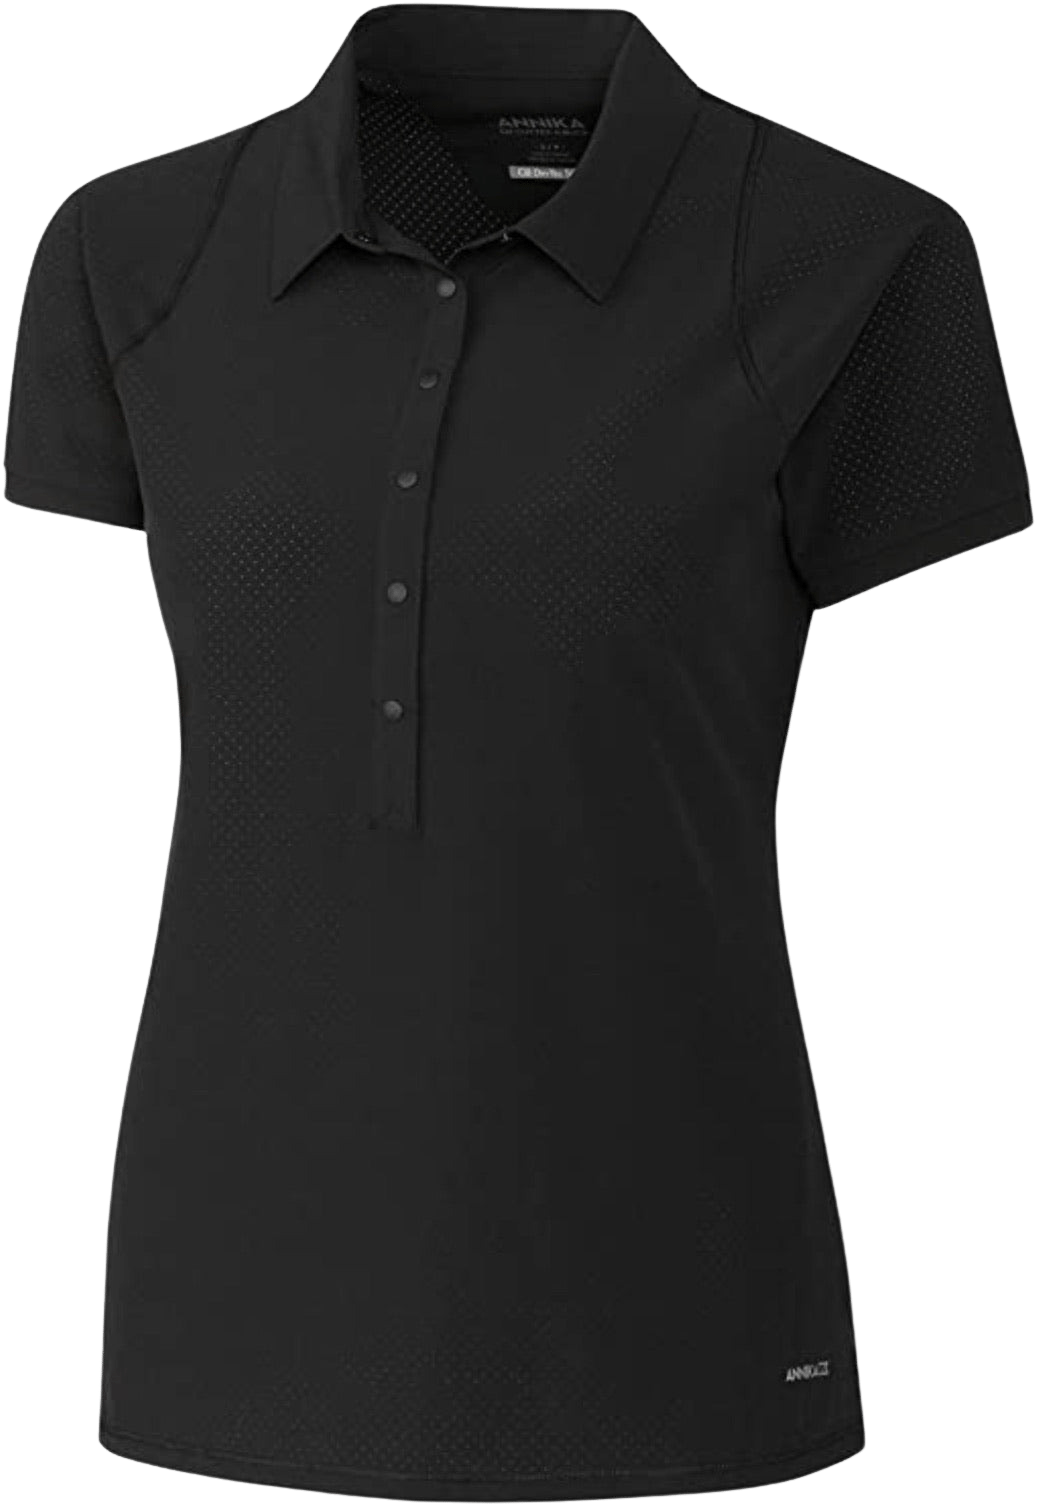 Cutter & Buck Perforated Short Sleeve Women's Polo